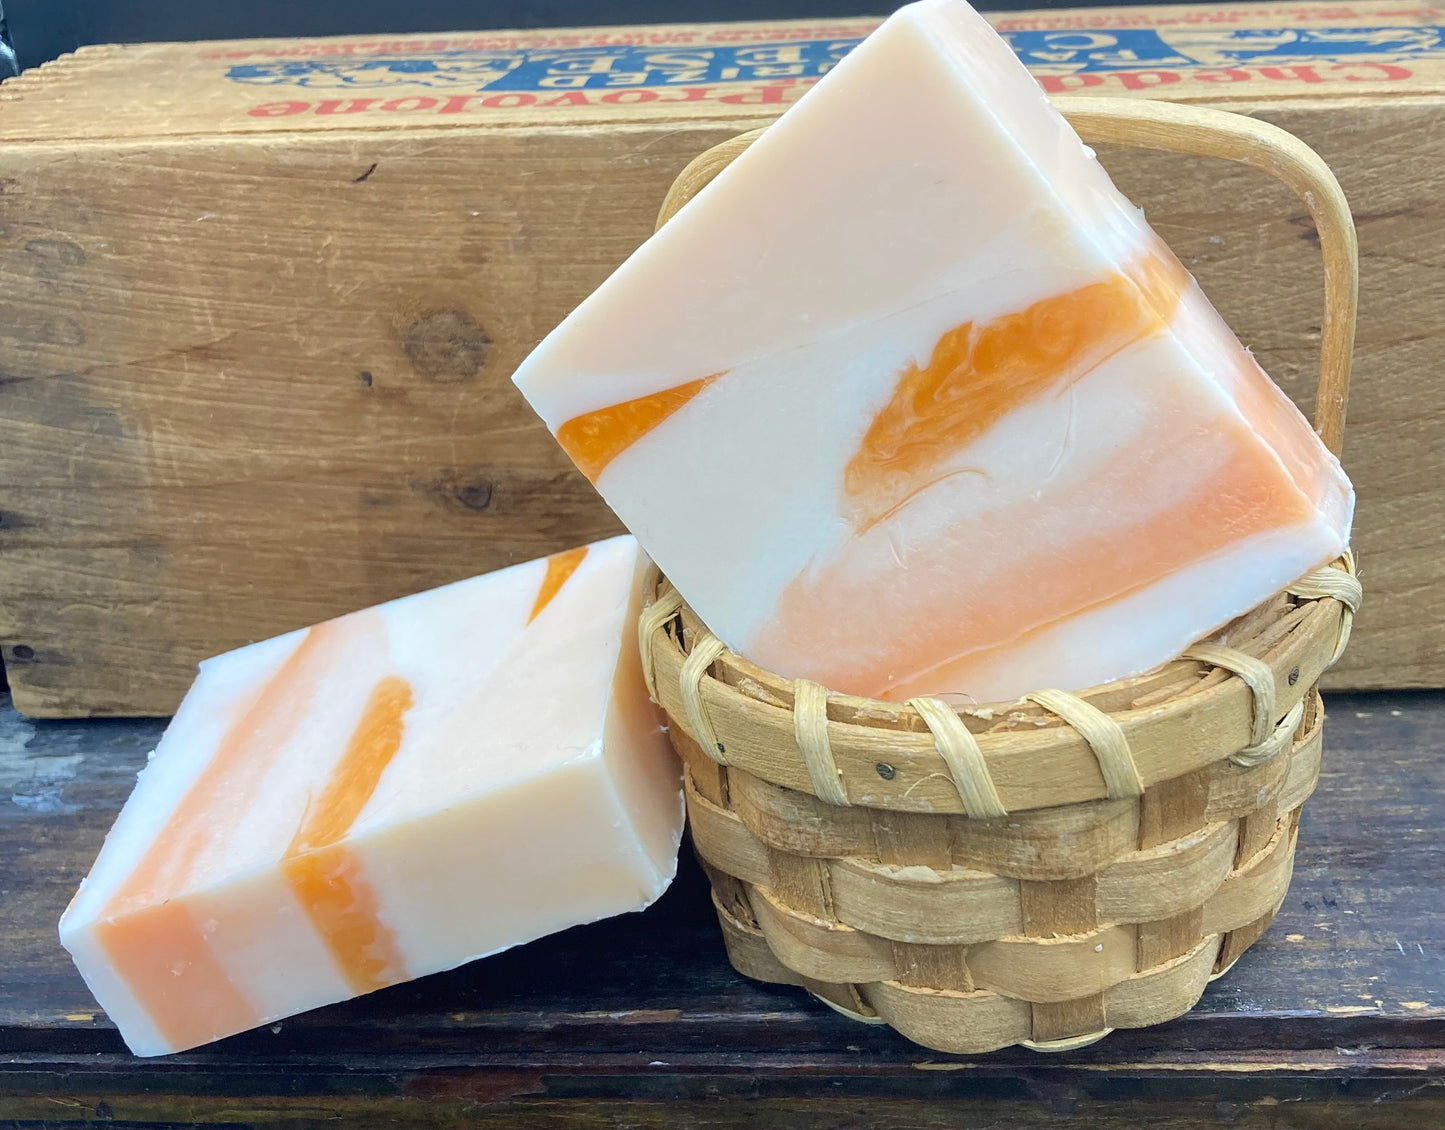 This is a 4 oz bar of Pumpkin Spice scented Goats Milk Soap.  The bar also includes Olive Oil and Aloe for a classic scent in a moisturizing bar of soap.  It makes bathtime a spa-like experience!